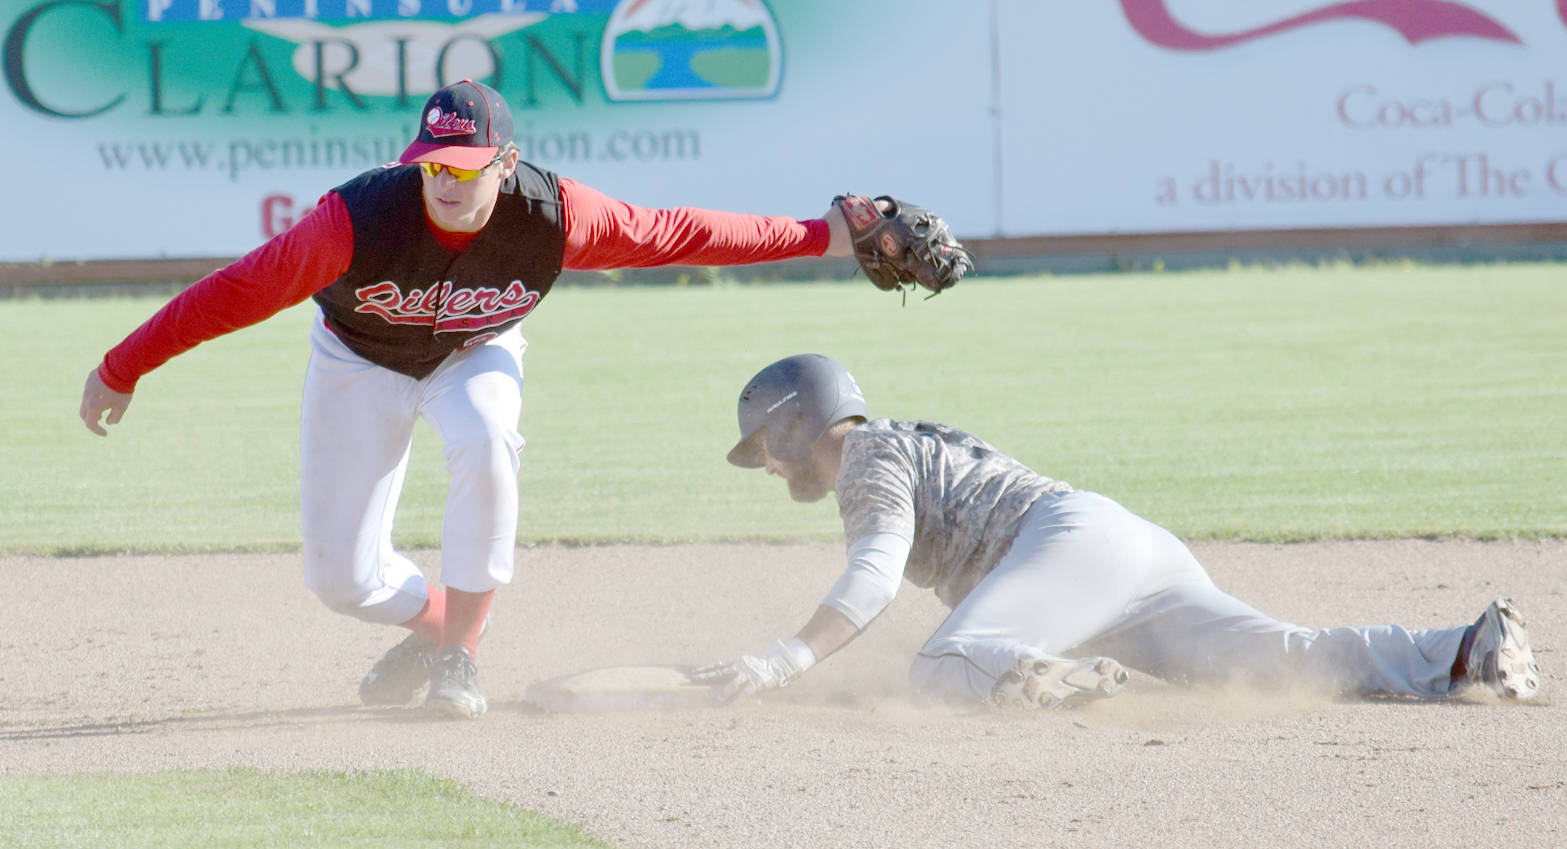 Adam Rojas of the Chugiak-Eagle River Chinooks slides under the tag of Oilers shortstop Caleb Hicks in the top of the second inning Thursday, July 27, 2017, at Coral Seymour Memorial Park in Kenai. (Photo by Jeff Helminiak/Peninsula Clarion)